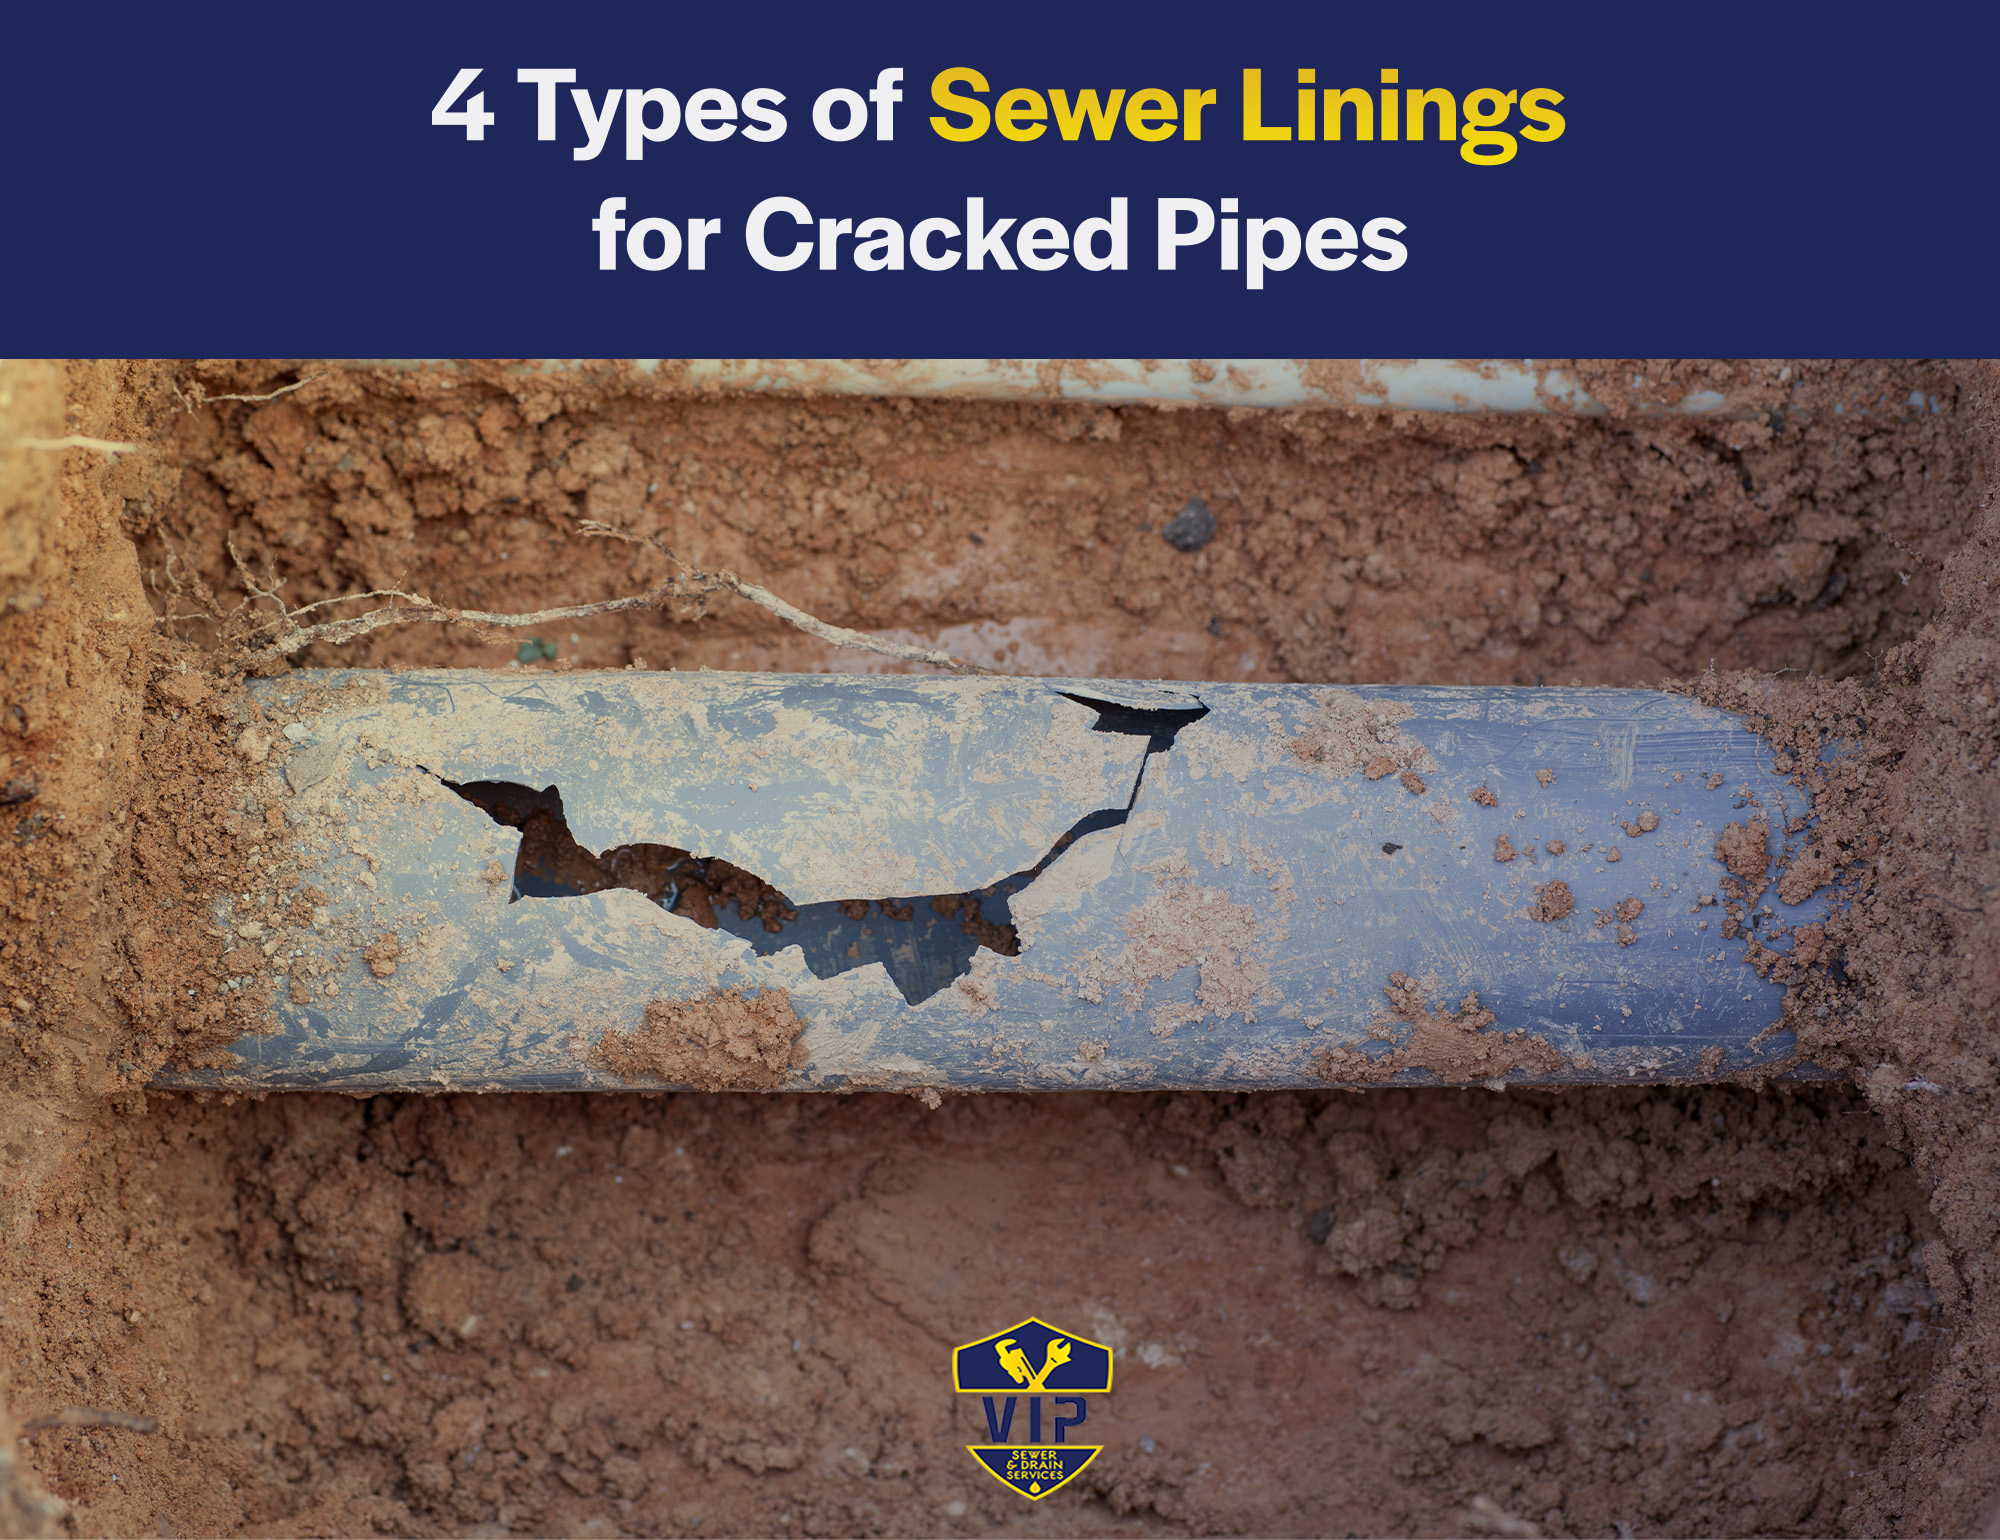 Trenchless Methods for Cracked Pipes